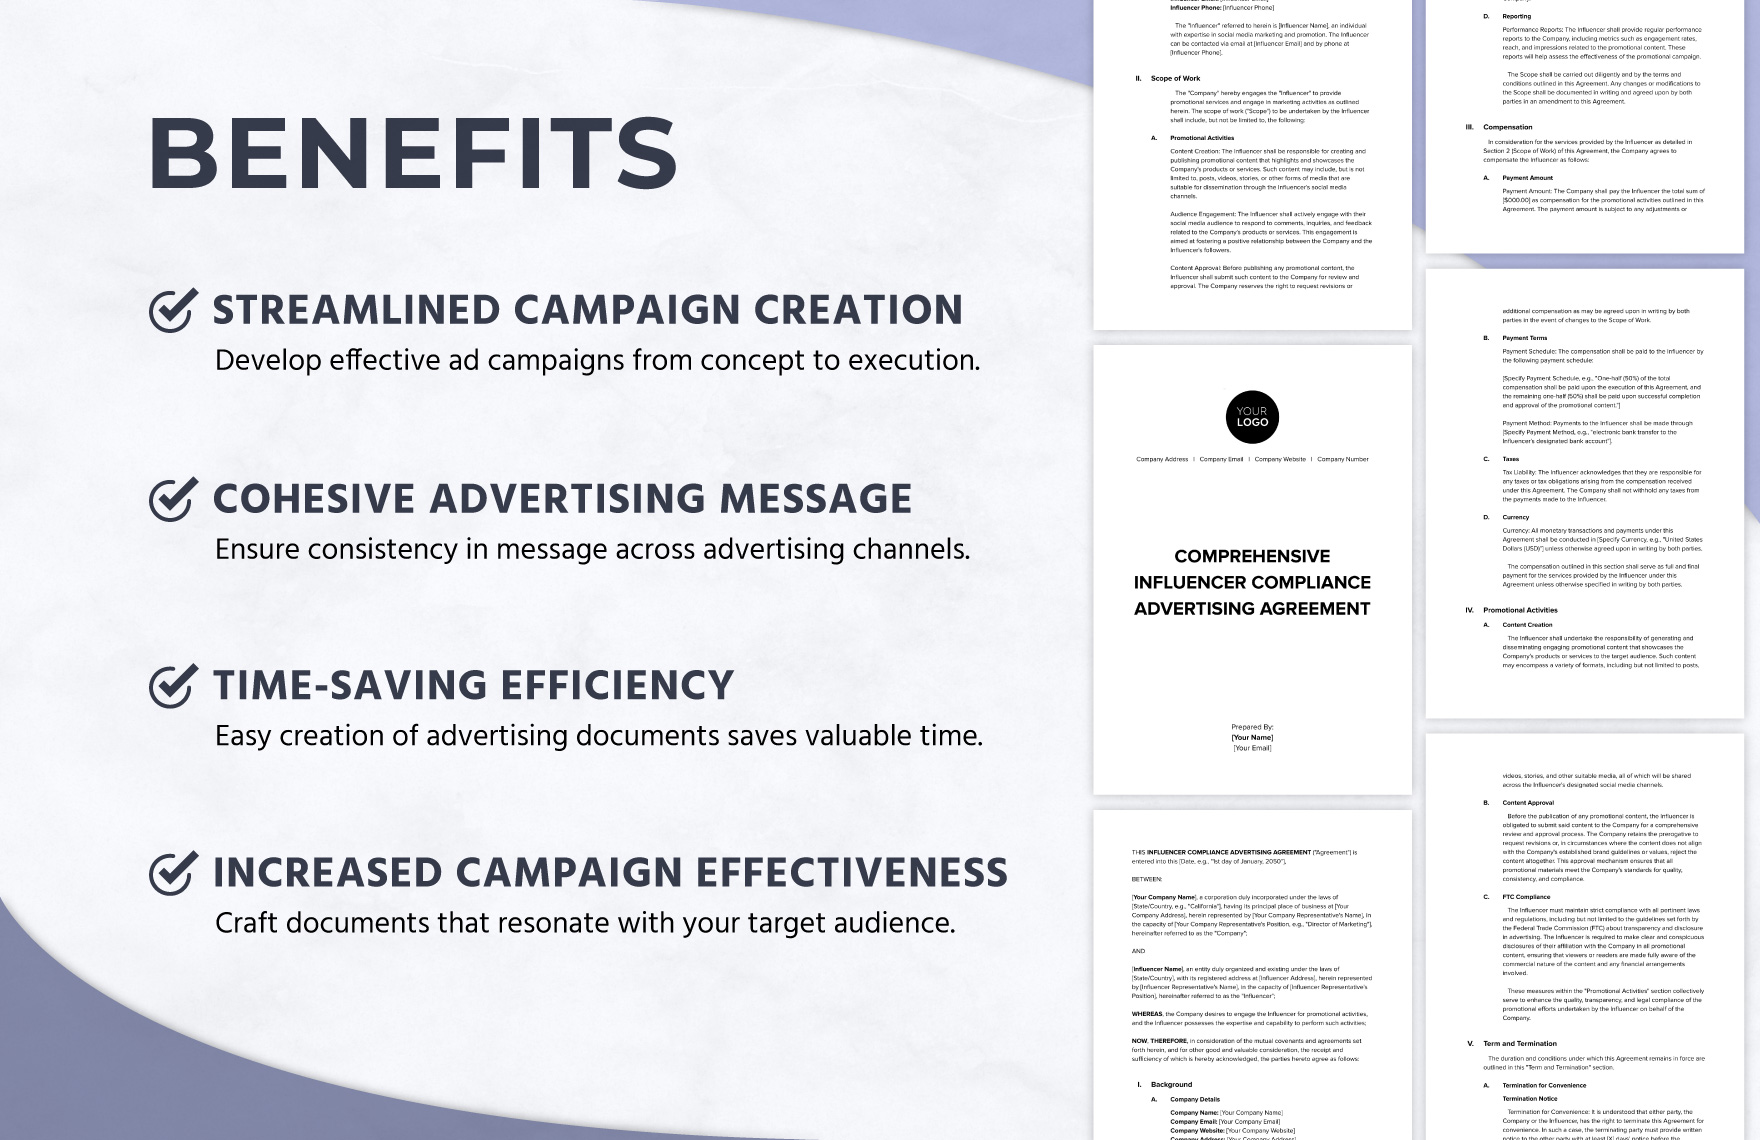 Comprehensive Influencer Compliance Advertising Agreement Template